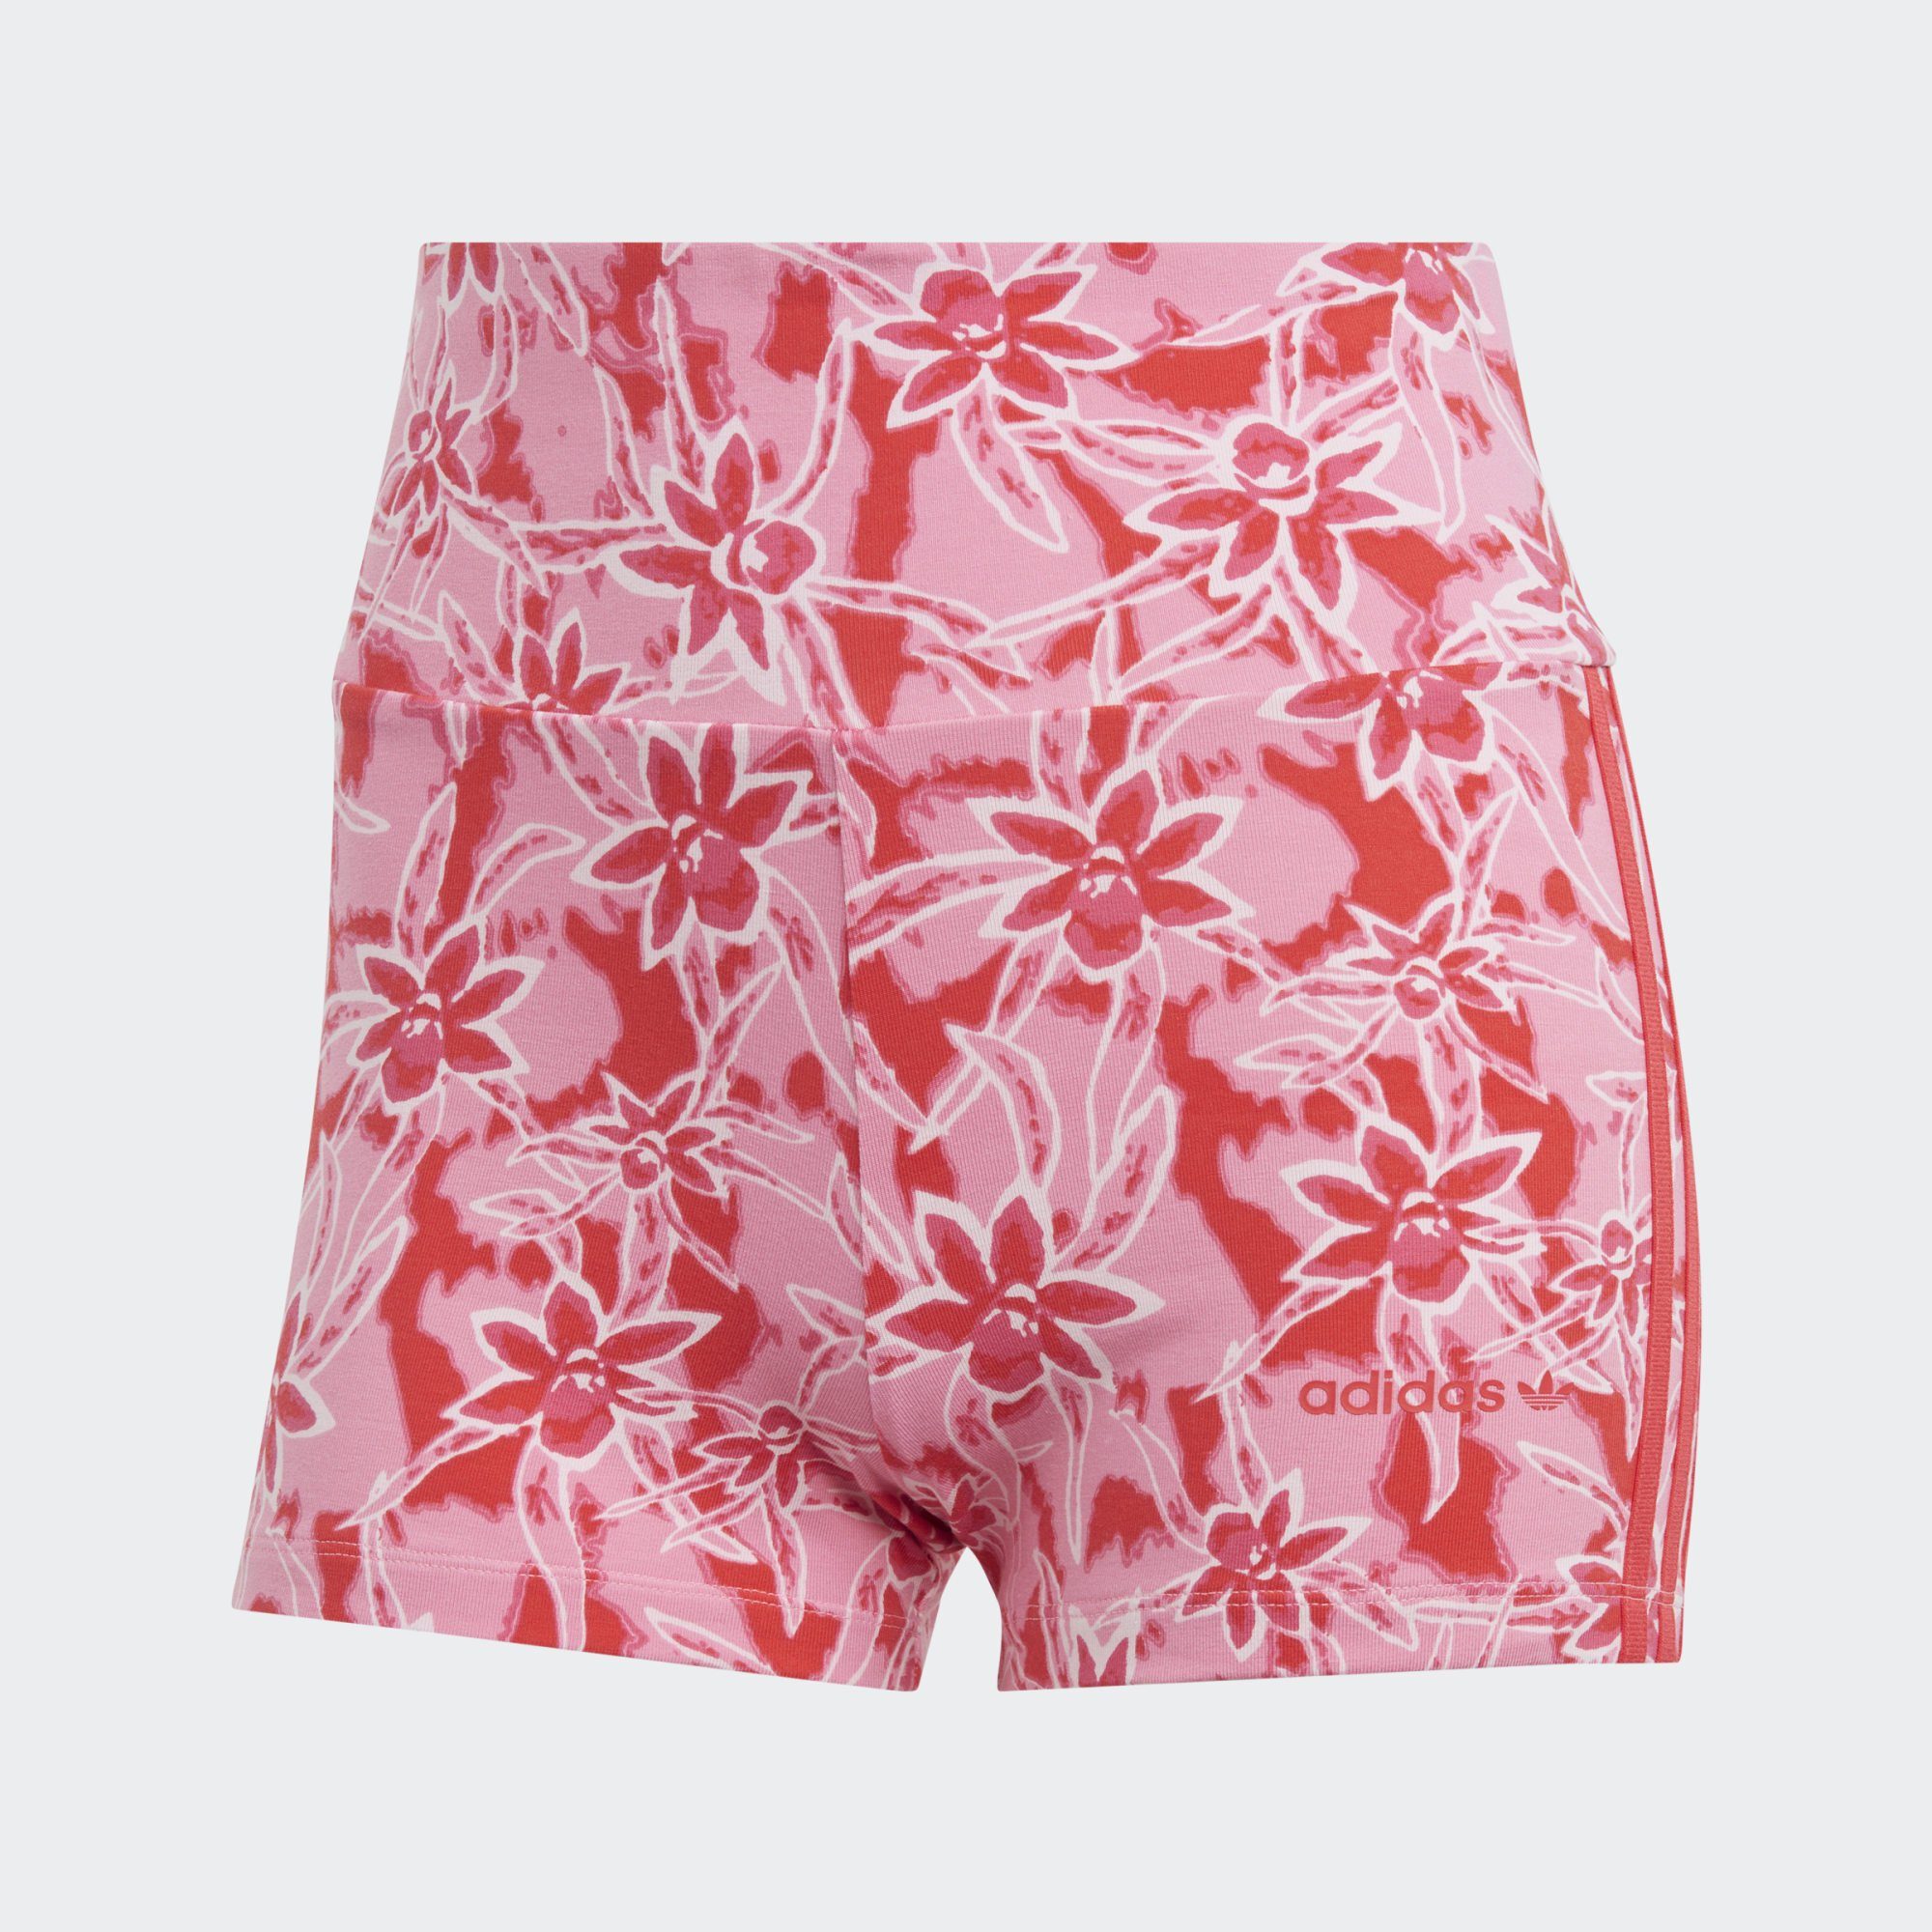 Funktionsshorts PRINT Clear ALLOVER adidas Multicolor Pink Originals SHORTS /